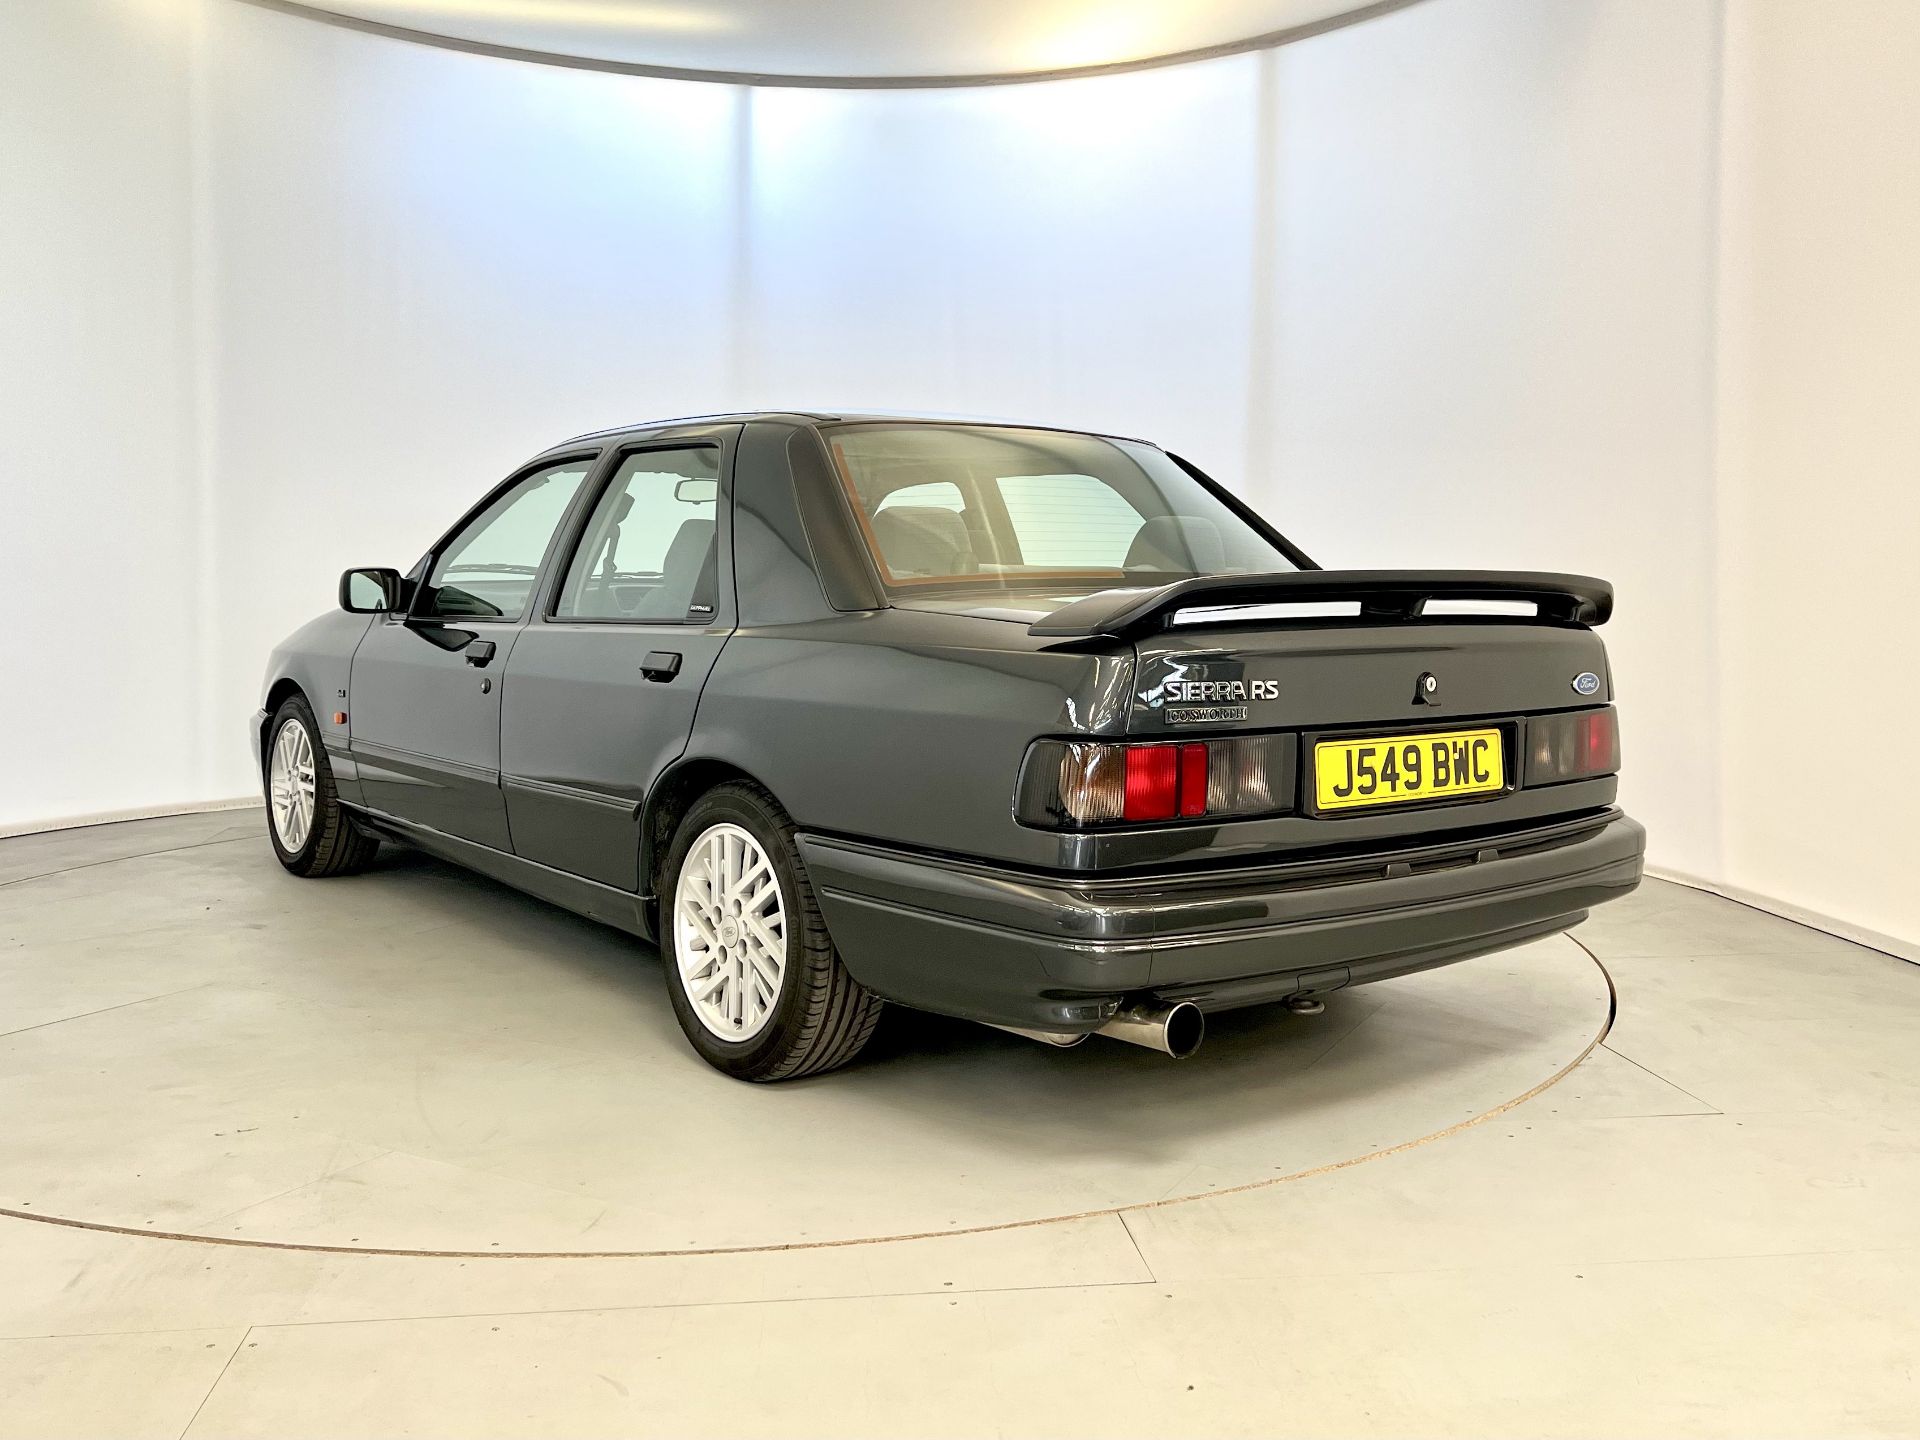 Ford Sierra Sapphire Cosworth - Image 7 of 37